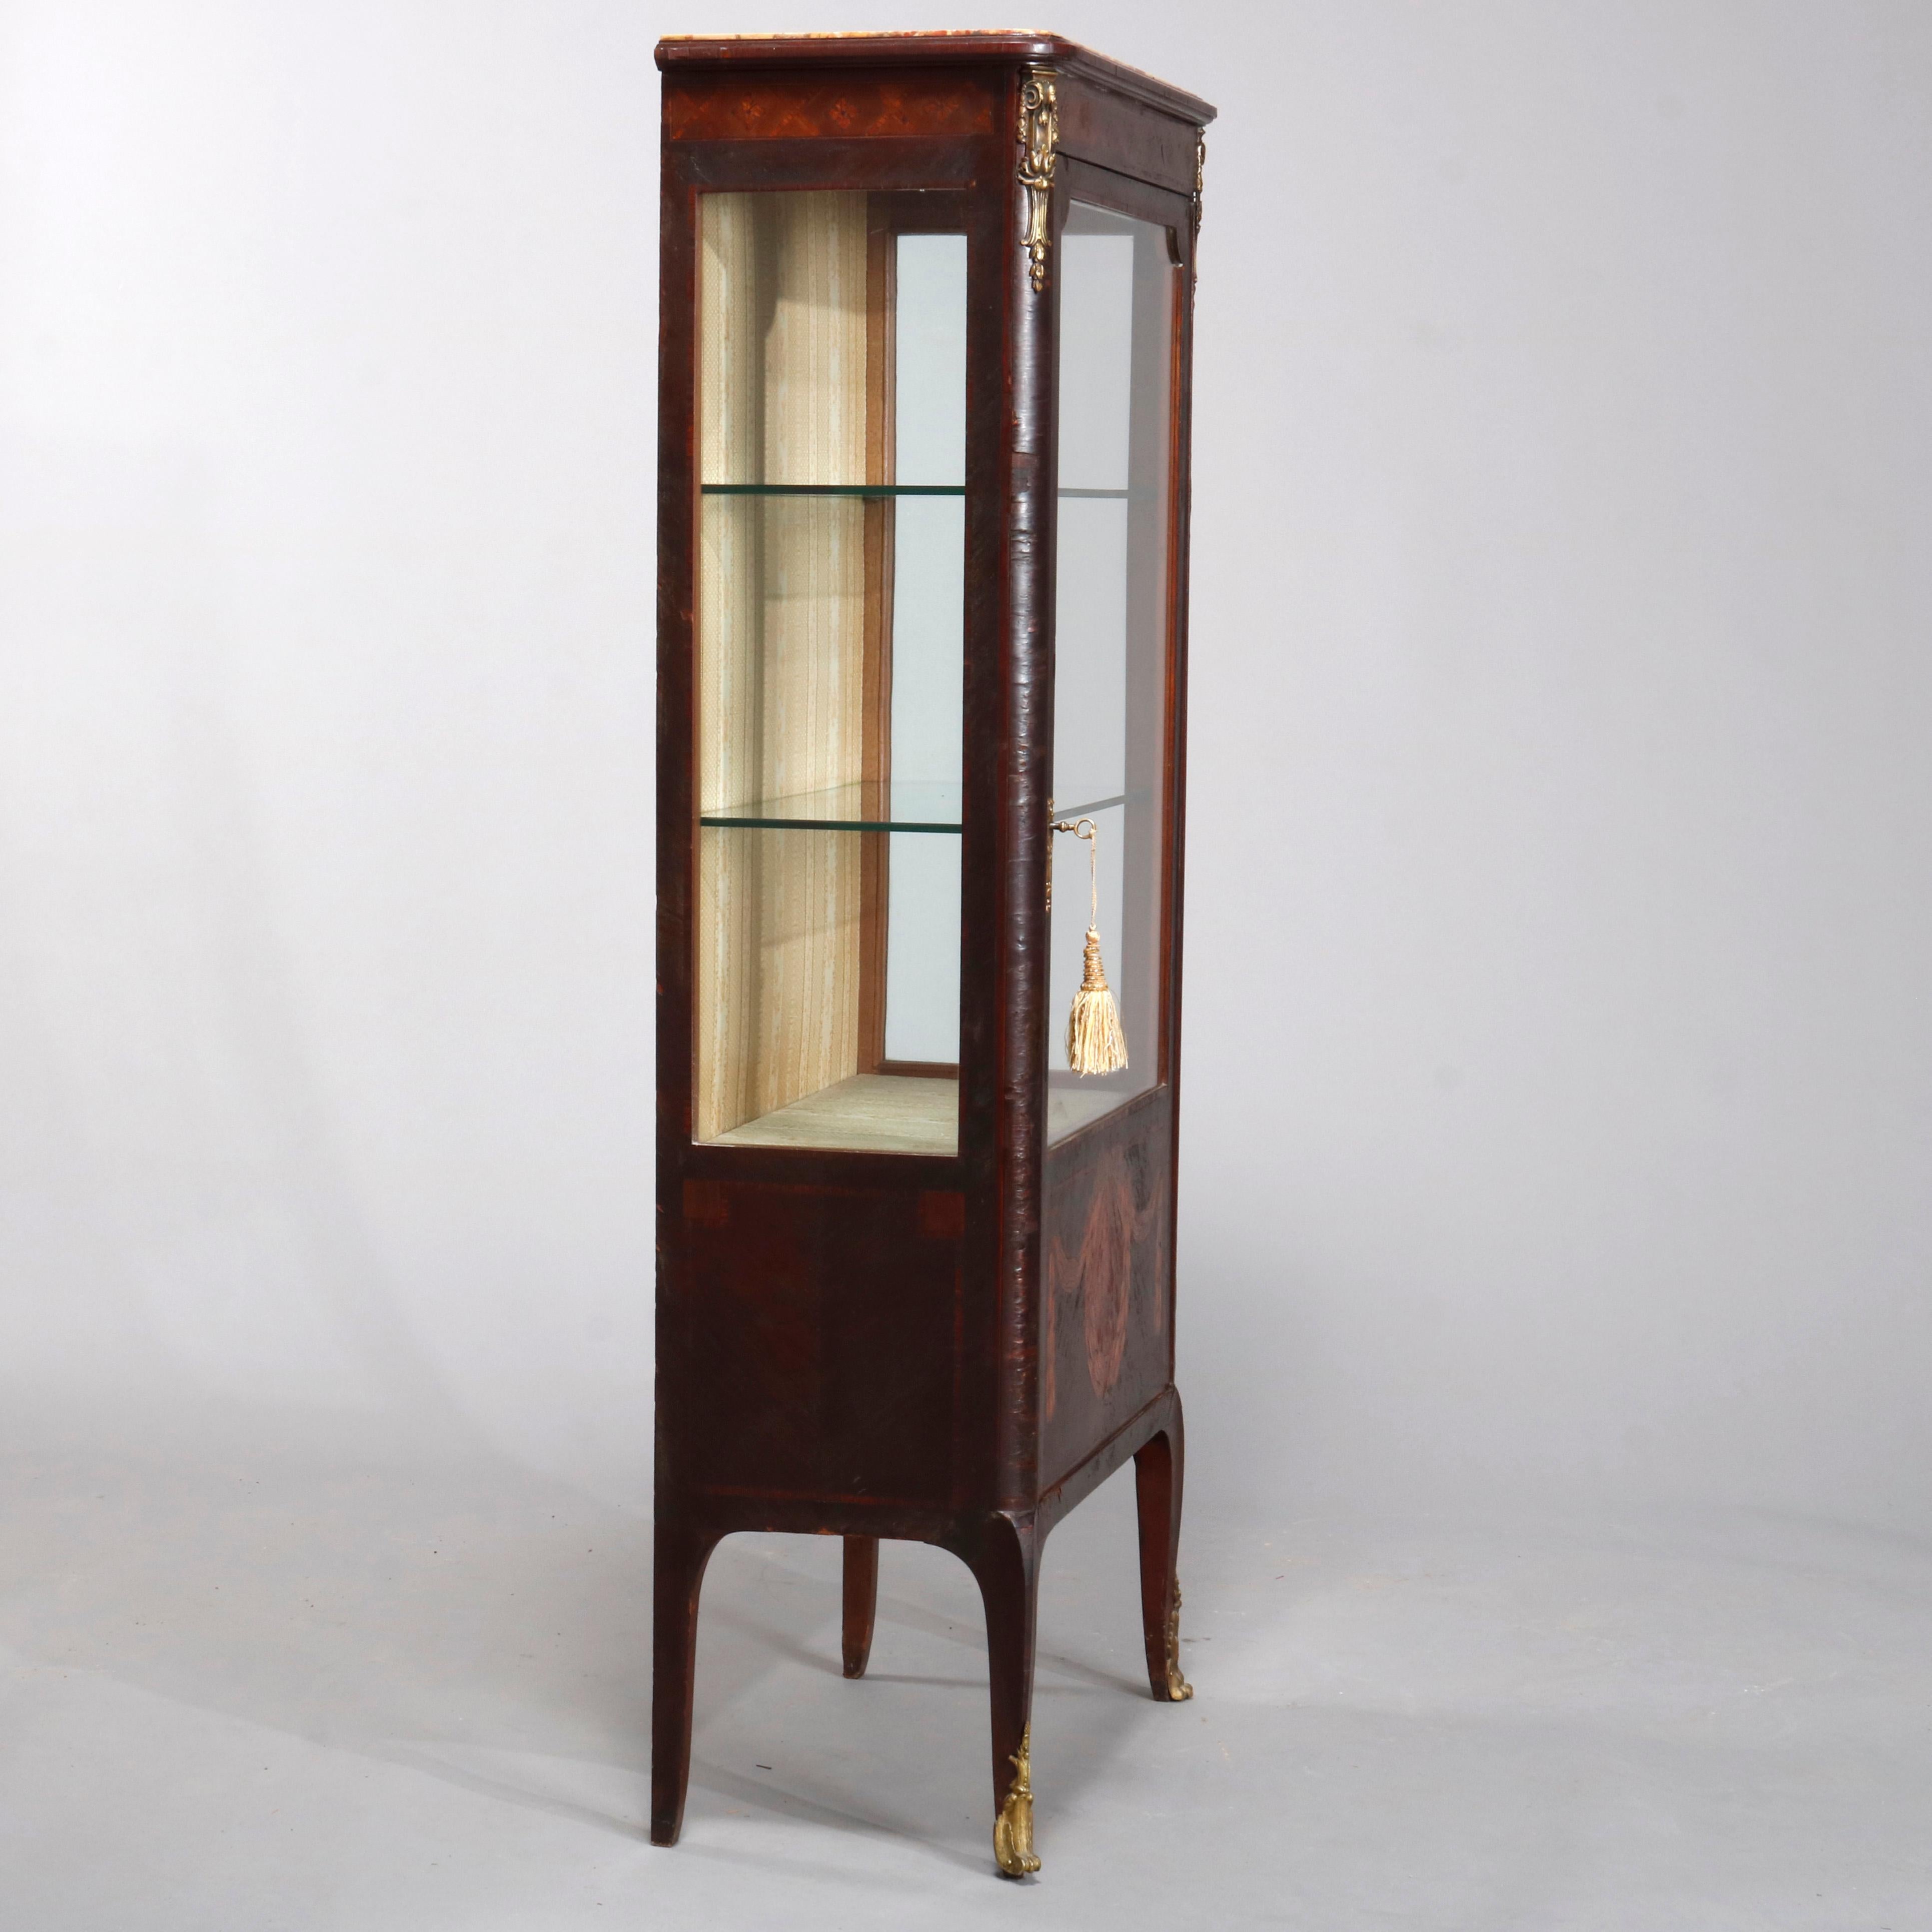 19th Century Antique French Louis XV Style Marquetry and Ormolu Decorated Vitrine, circa 1890